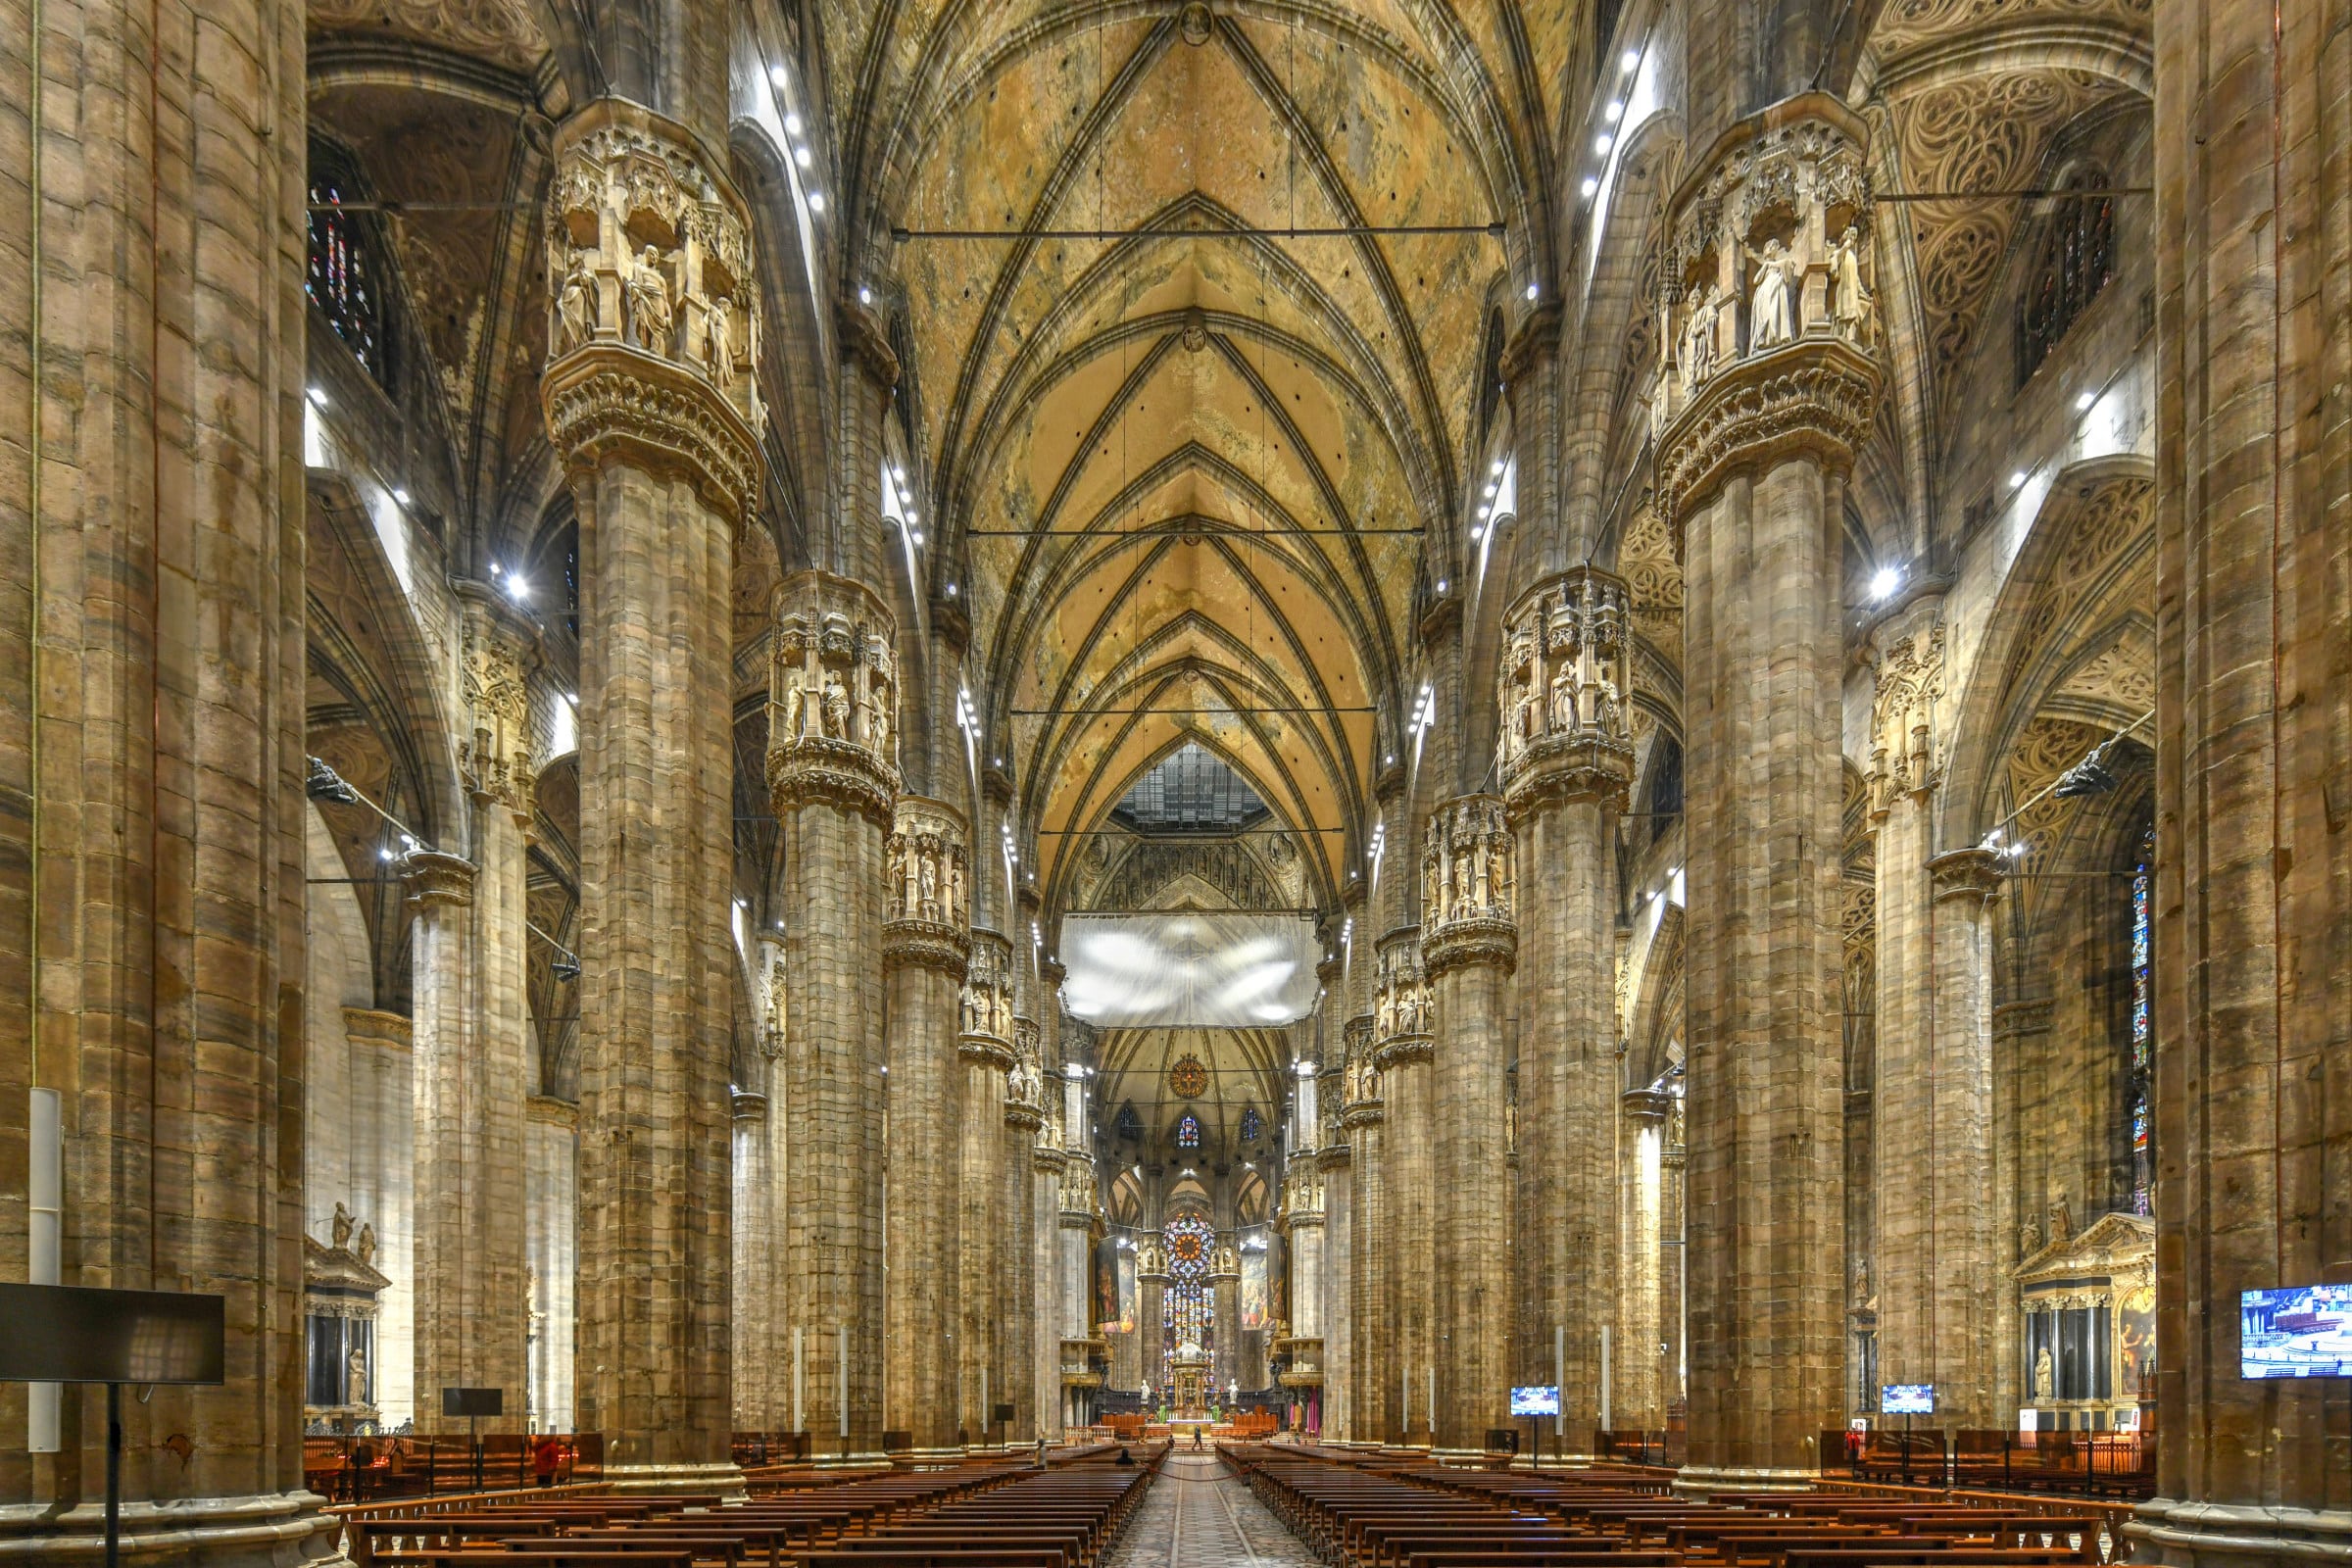 Interior of the Duomo Cathedral